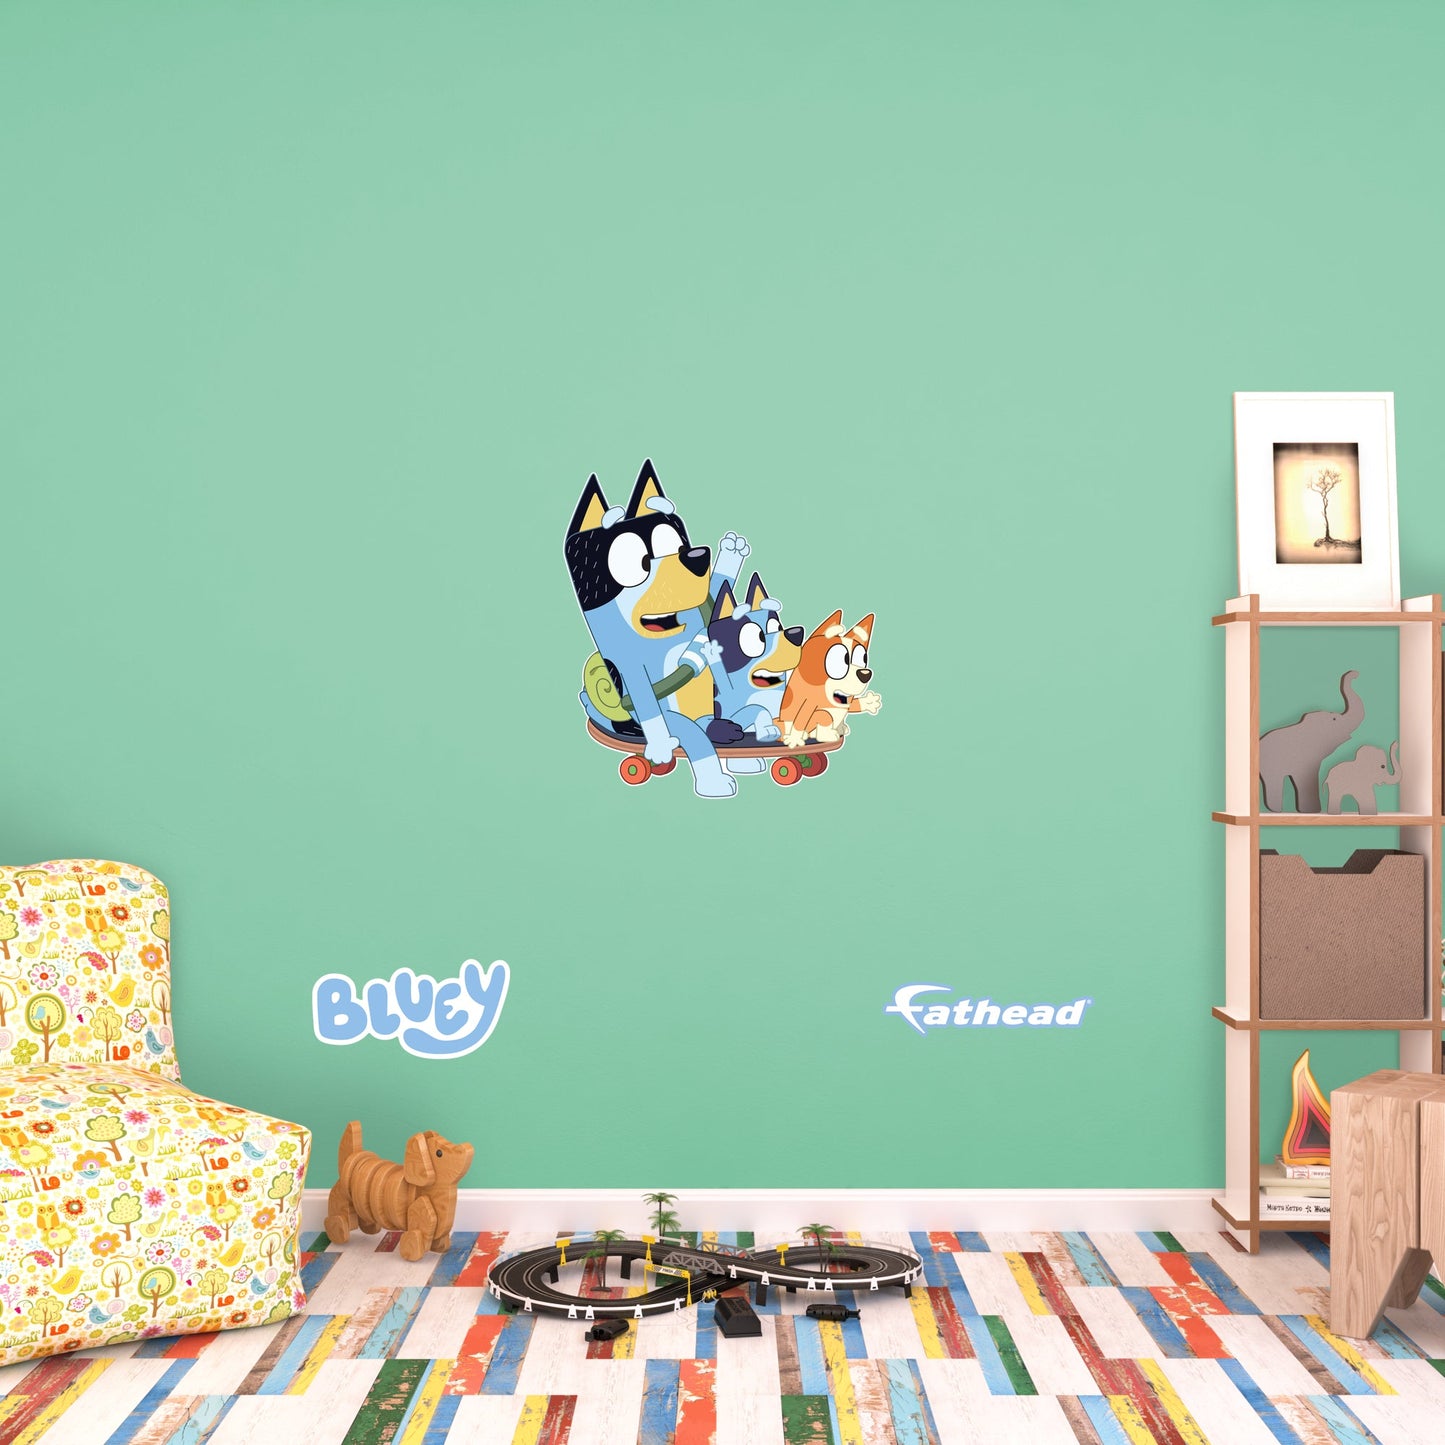 Bluey: Bandit, Bluey, Bingo Skateboard Icon - Officially Licensed BBC Removable Adhesive Decal